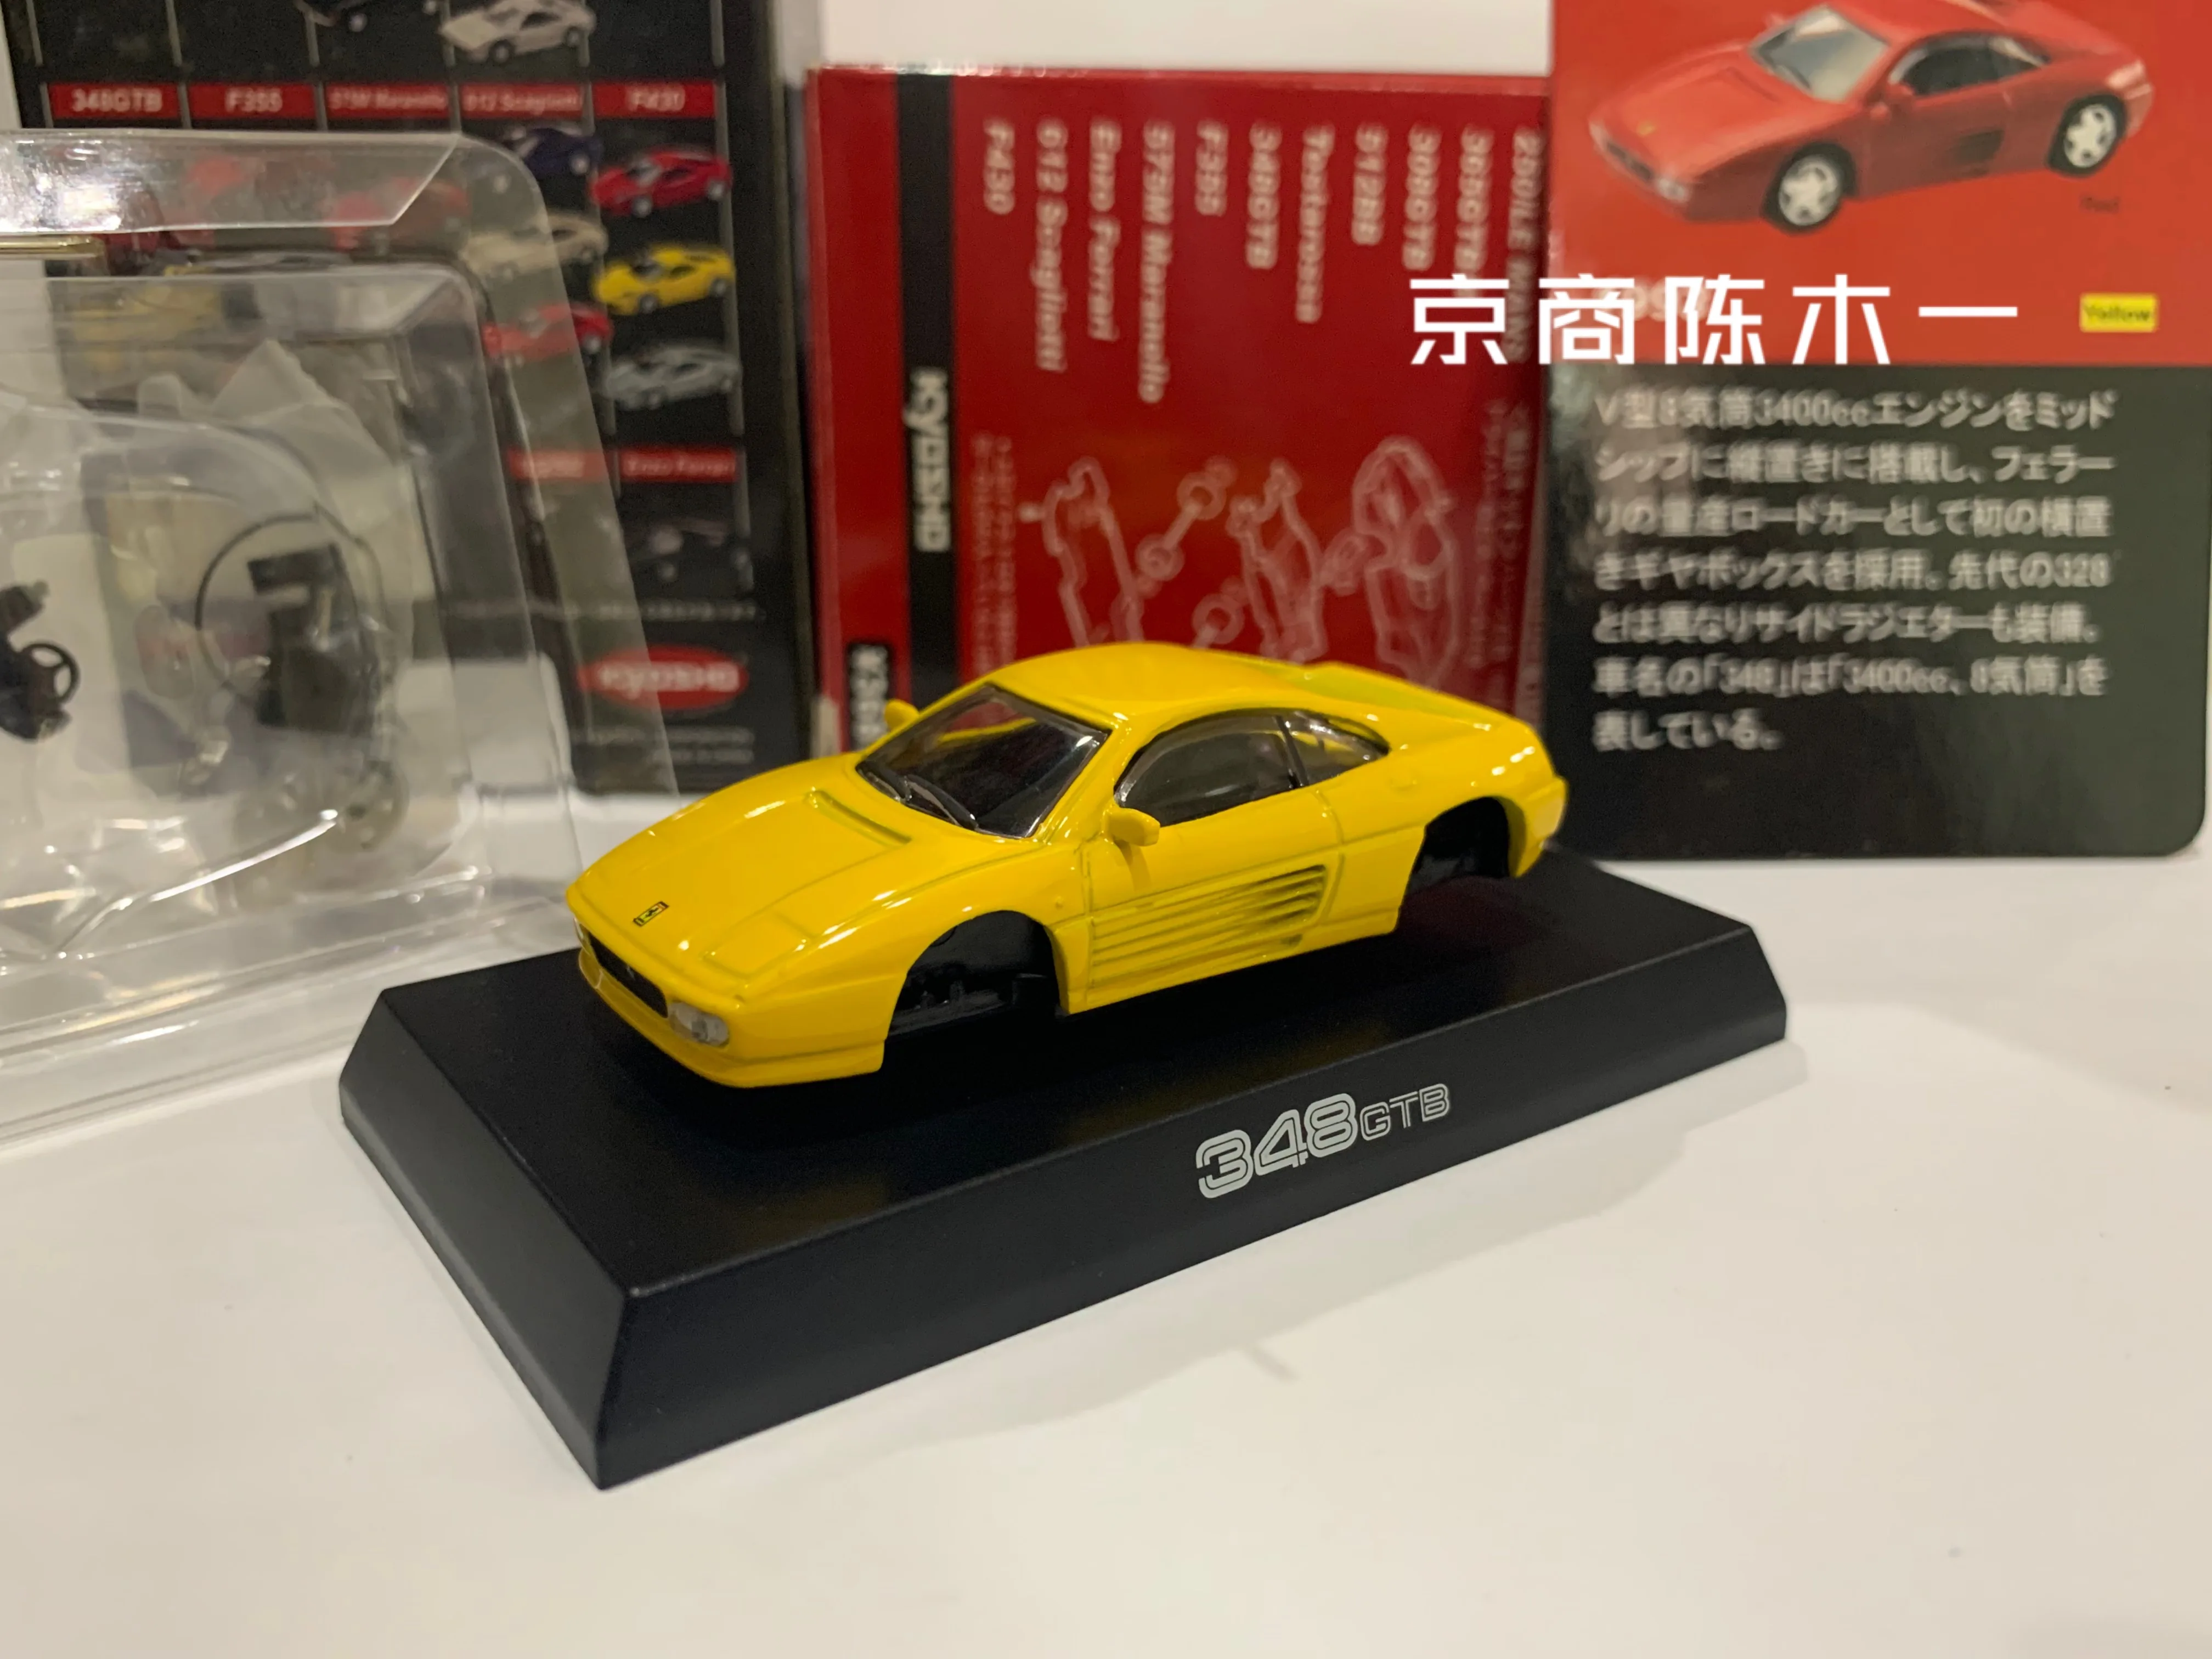 

1/64 KYOSHO Ferrari F40 GTE Collection of die-cast alloy assembled car decoration model toys